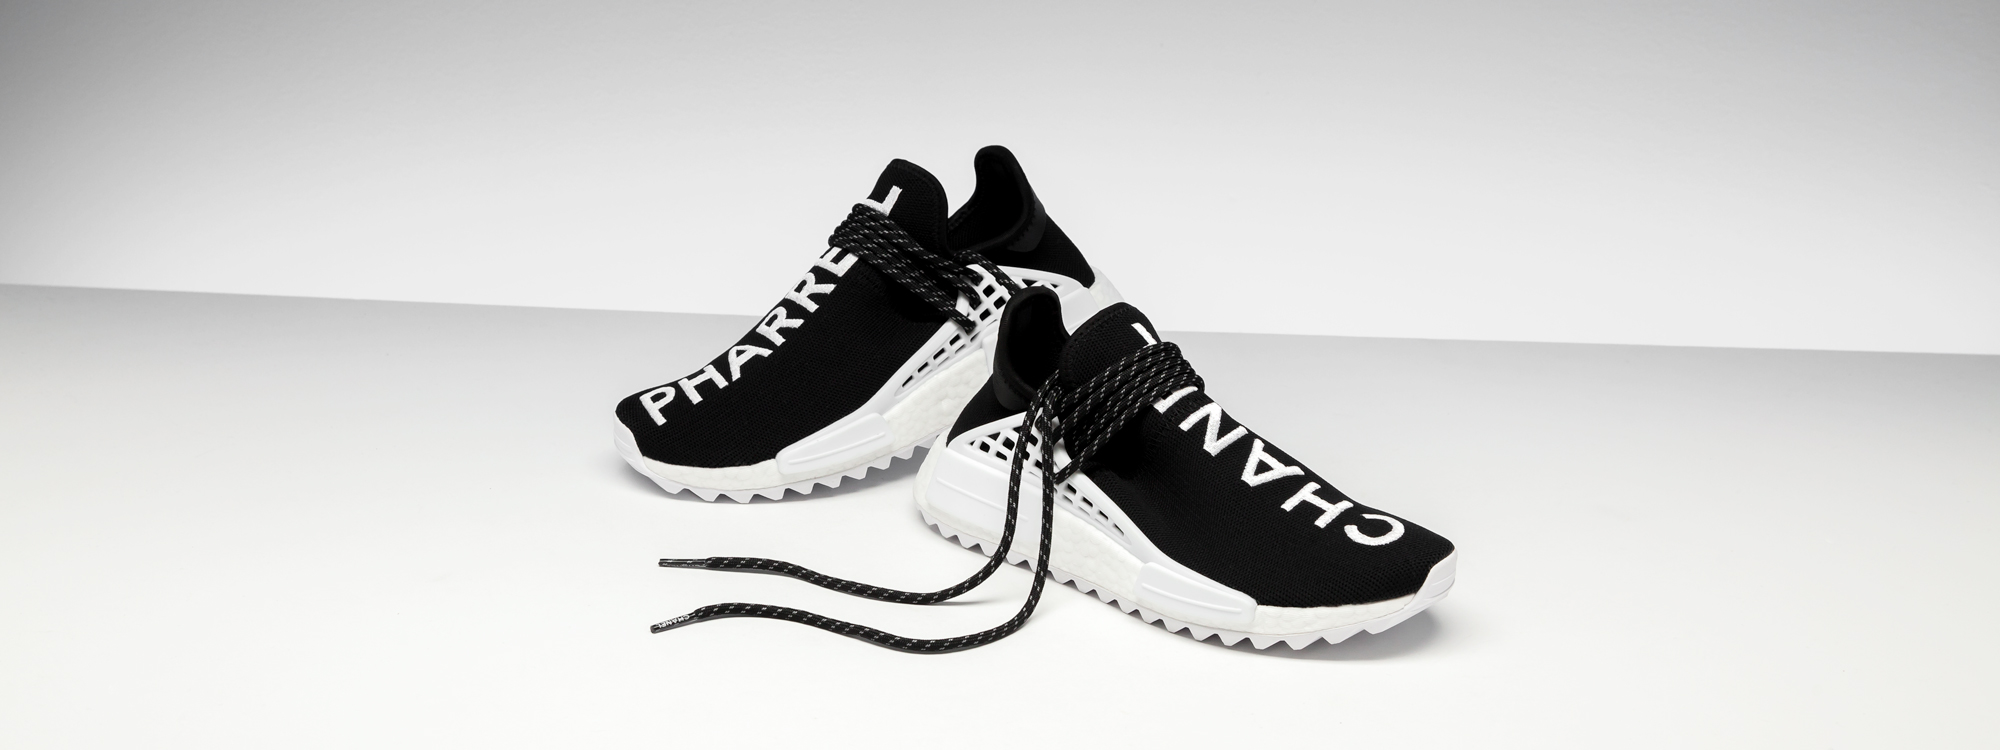 price of new Human Race     Chanel